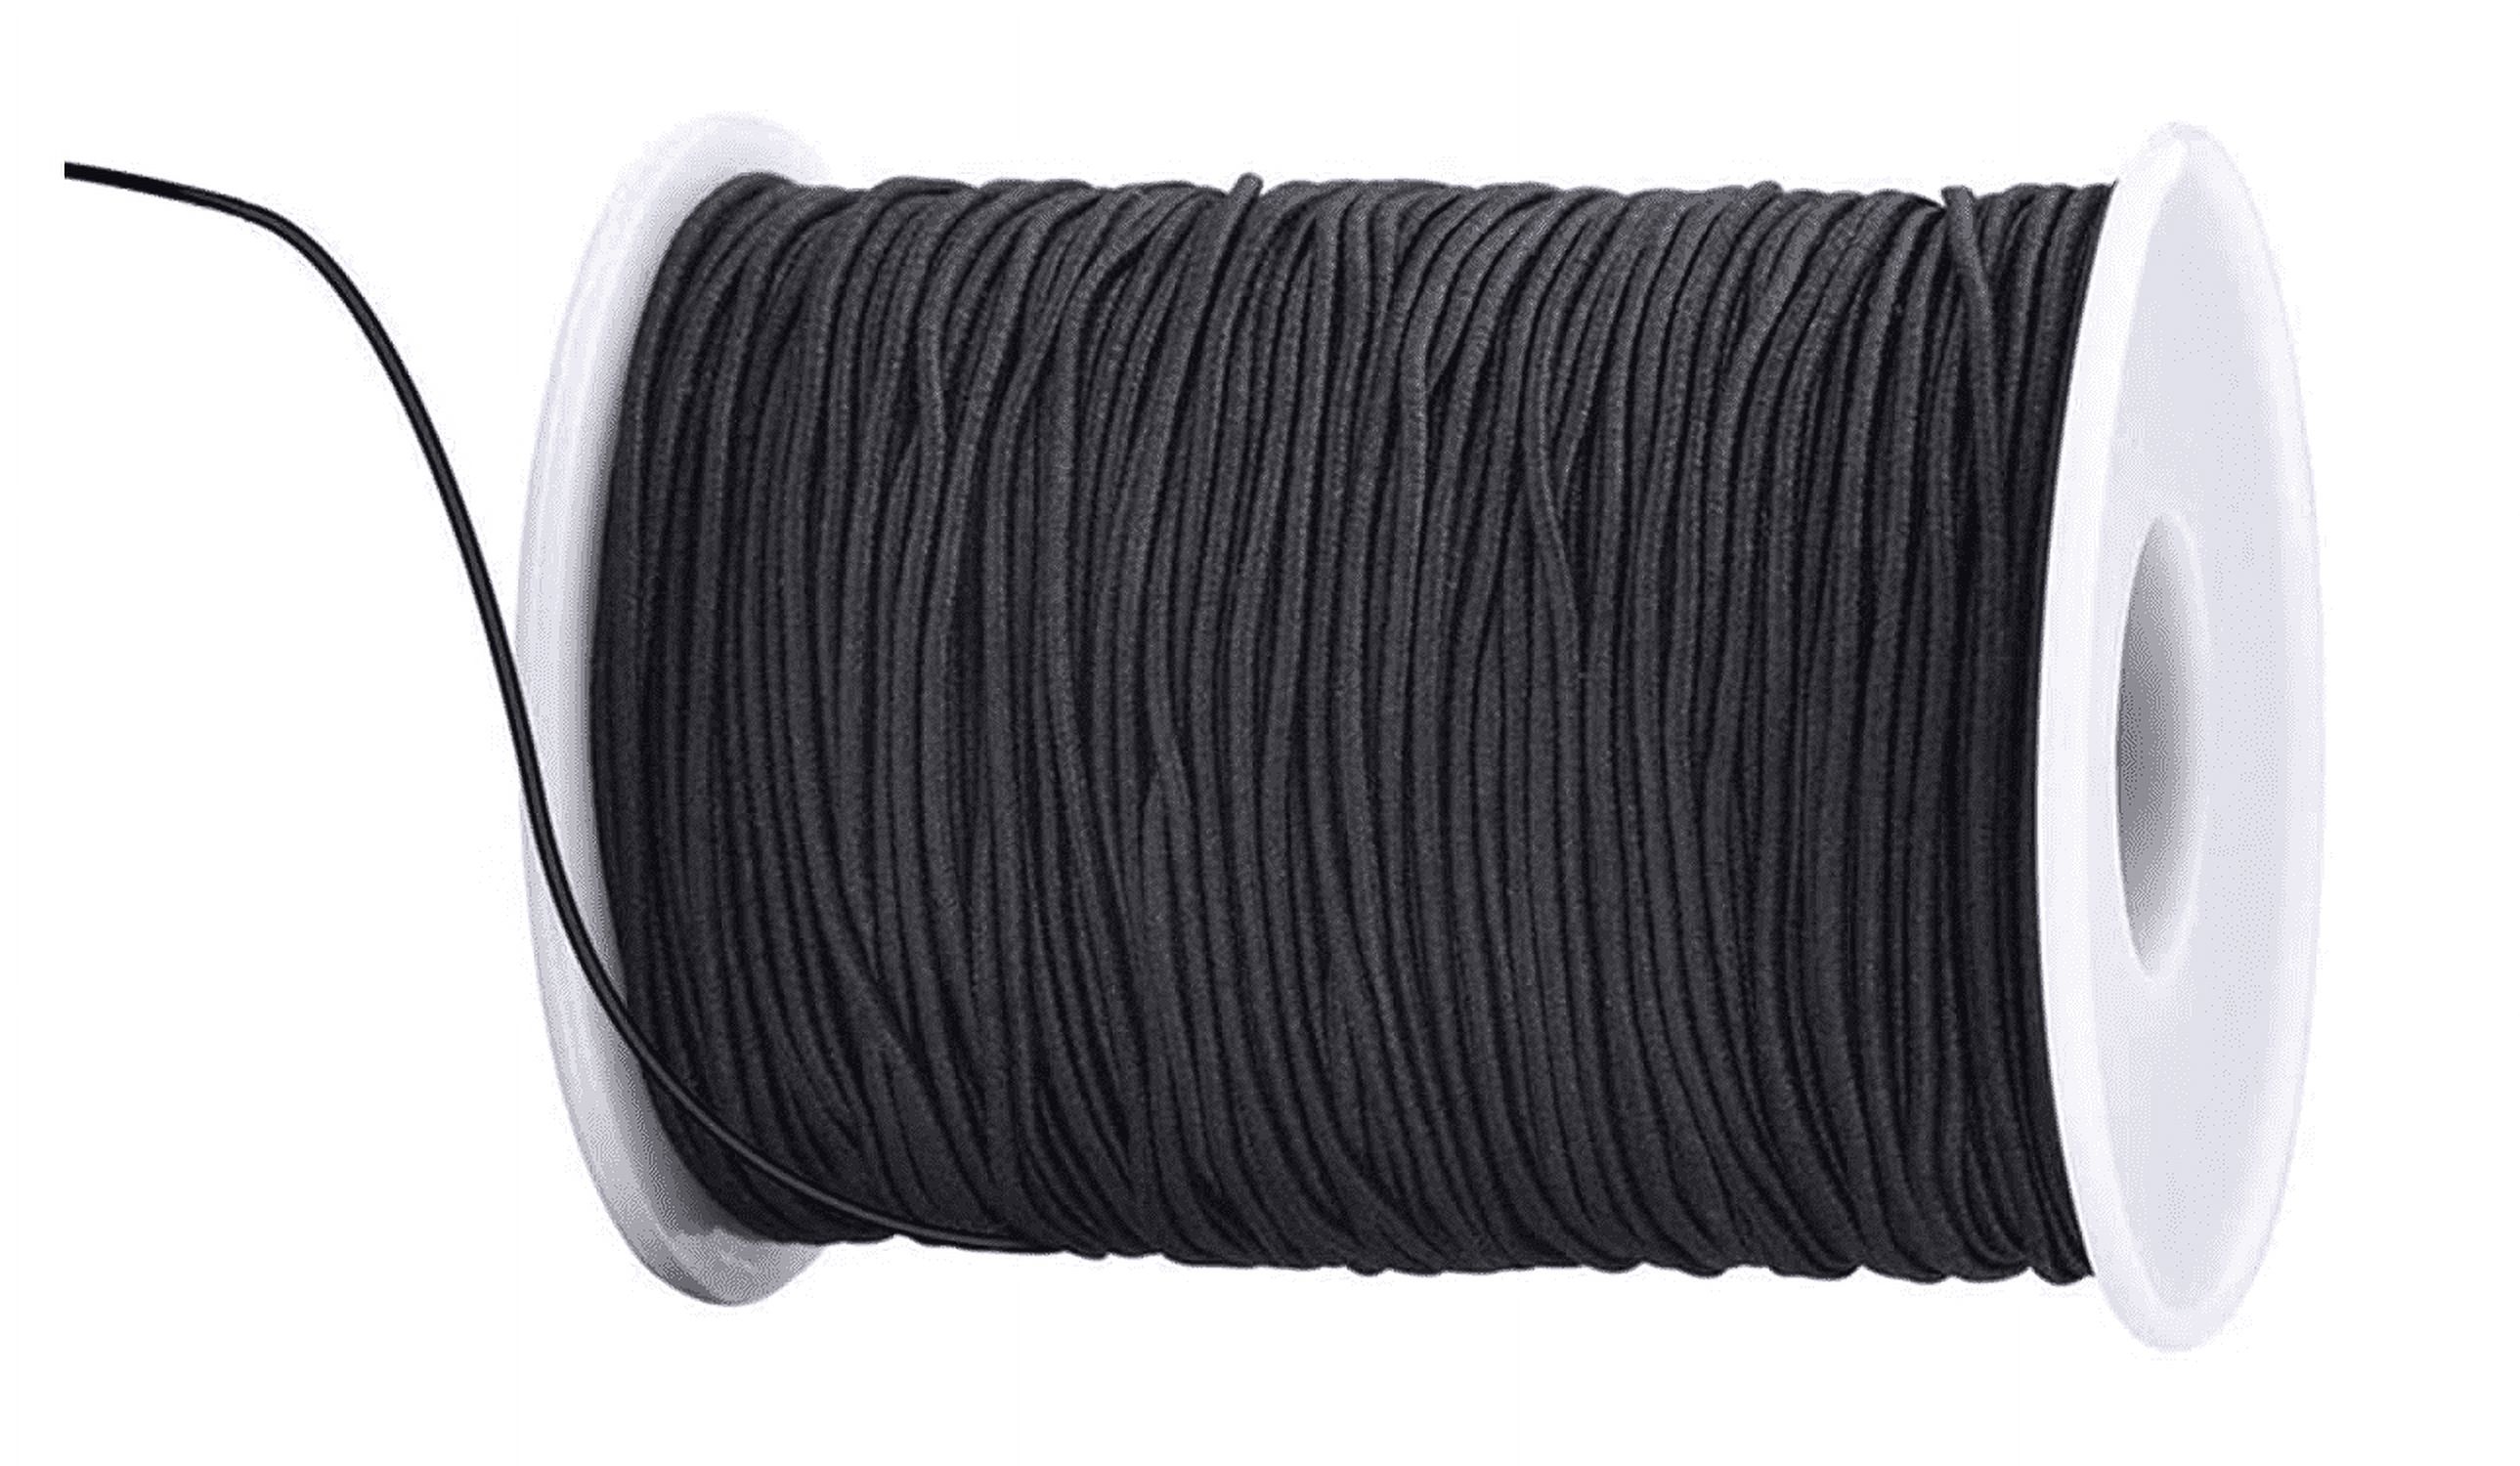 Topboutique 1mm Elastic Cord Stretchy String for Bracelets